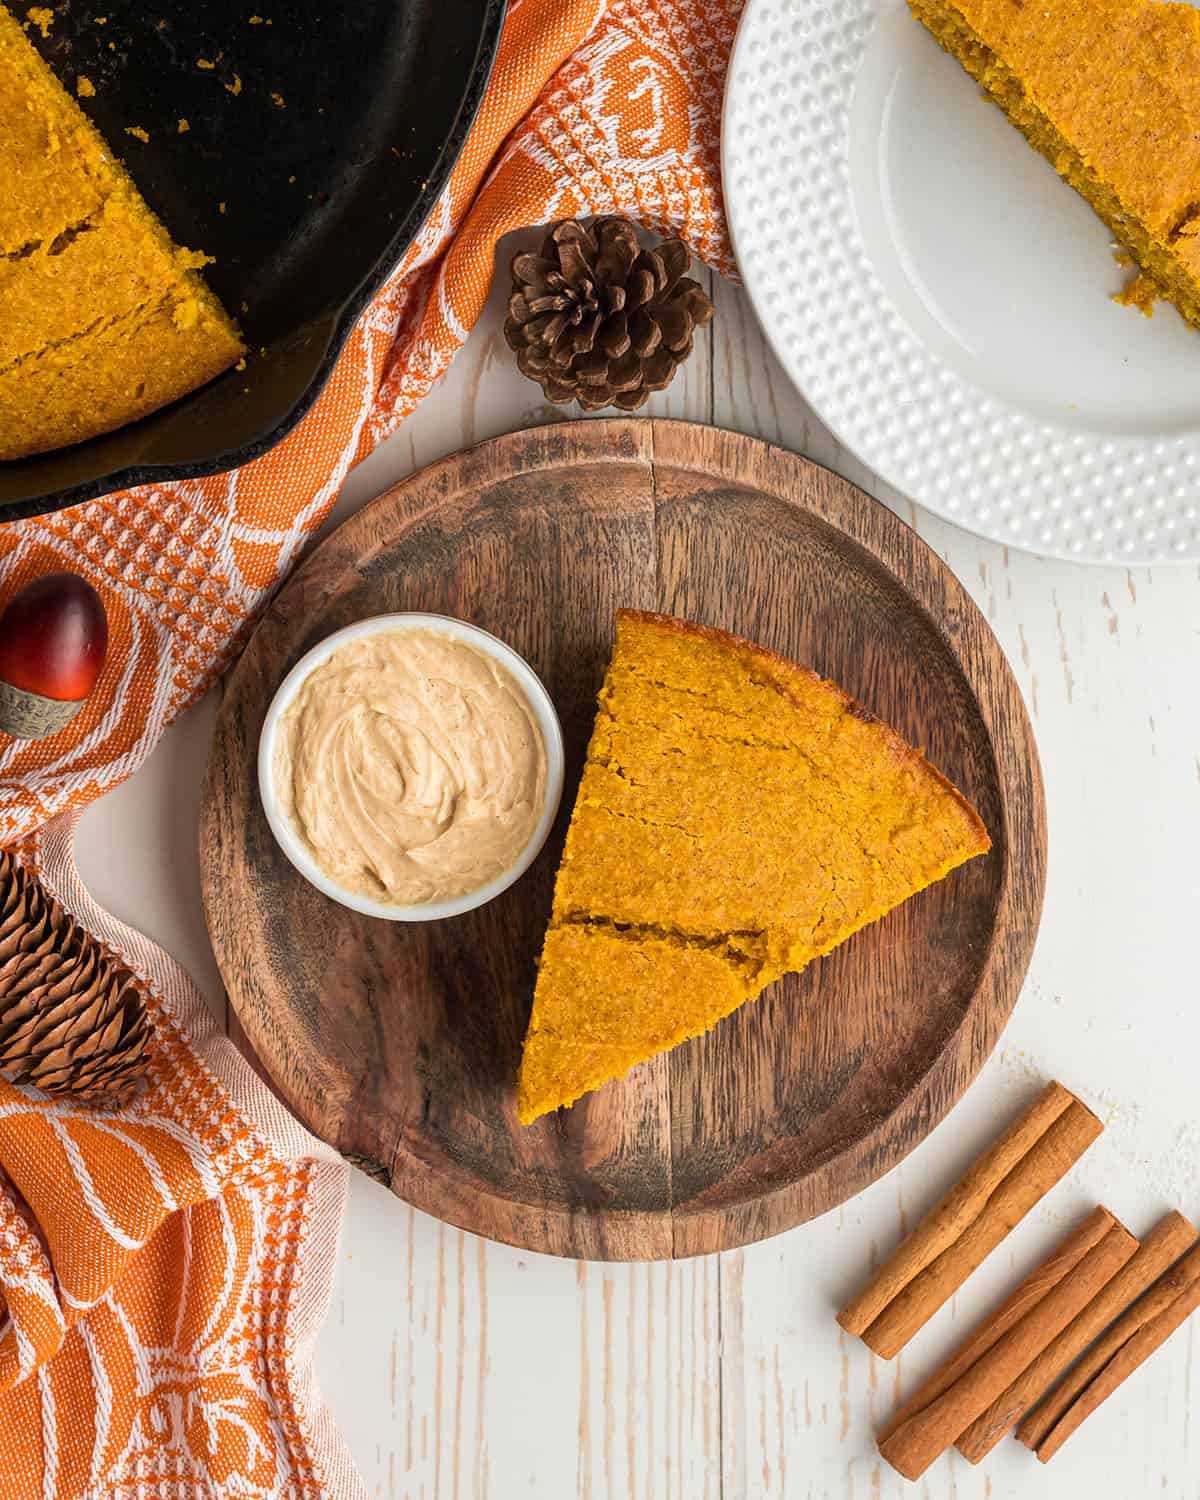 A slice of pumpkin cornbread on a wood plate surrounded by a small dish of maple butter, cinnamon sticks, and an orange towel.